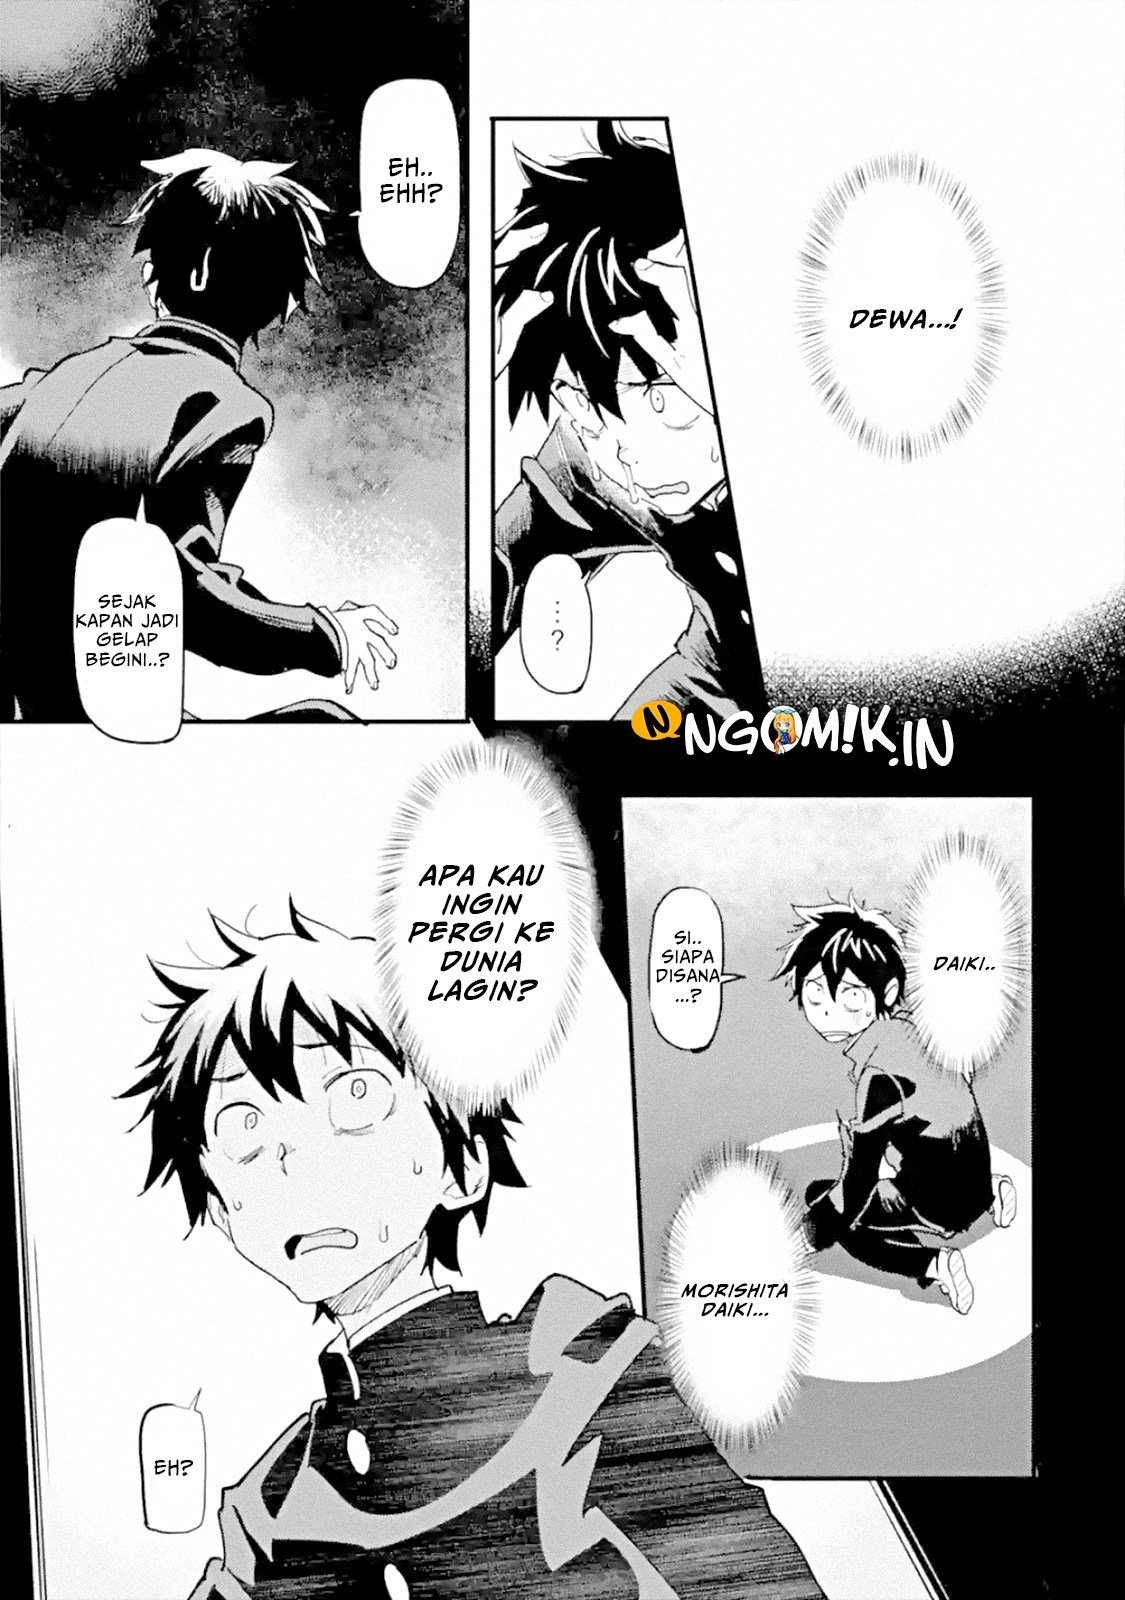 Baca The Hero Who Returned Remains the Strongest in the Modern World Chapter 1.2  - GudangKomik